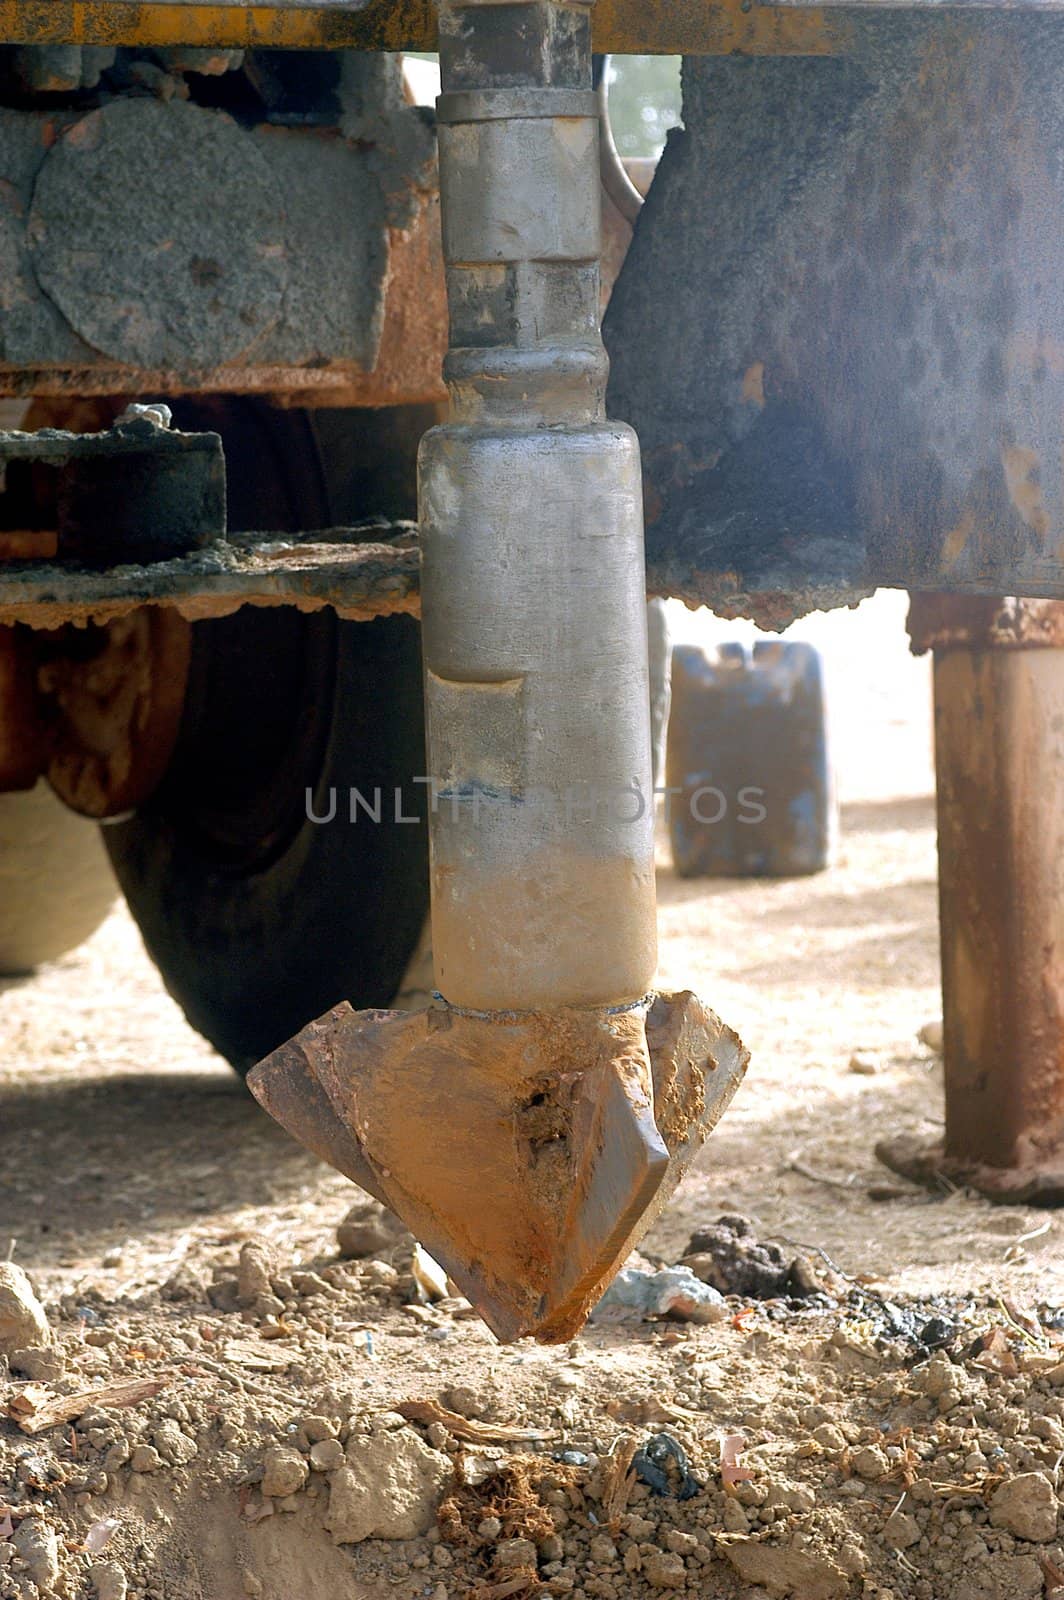 All stages of the drilling of a well in Burkina Faso Faso. Water is with 40 meters of depth and it is necessary to use a truck of drilling. To final manual pump will be assembled so that the well is protected from all pollution outside. A well costs 8000 Euro which are financed by humanitarian associations.